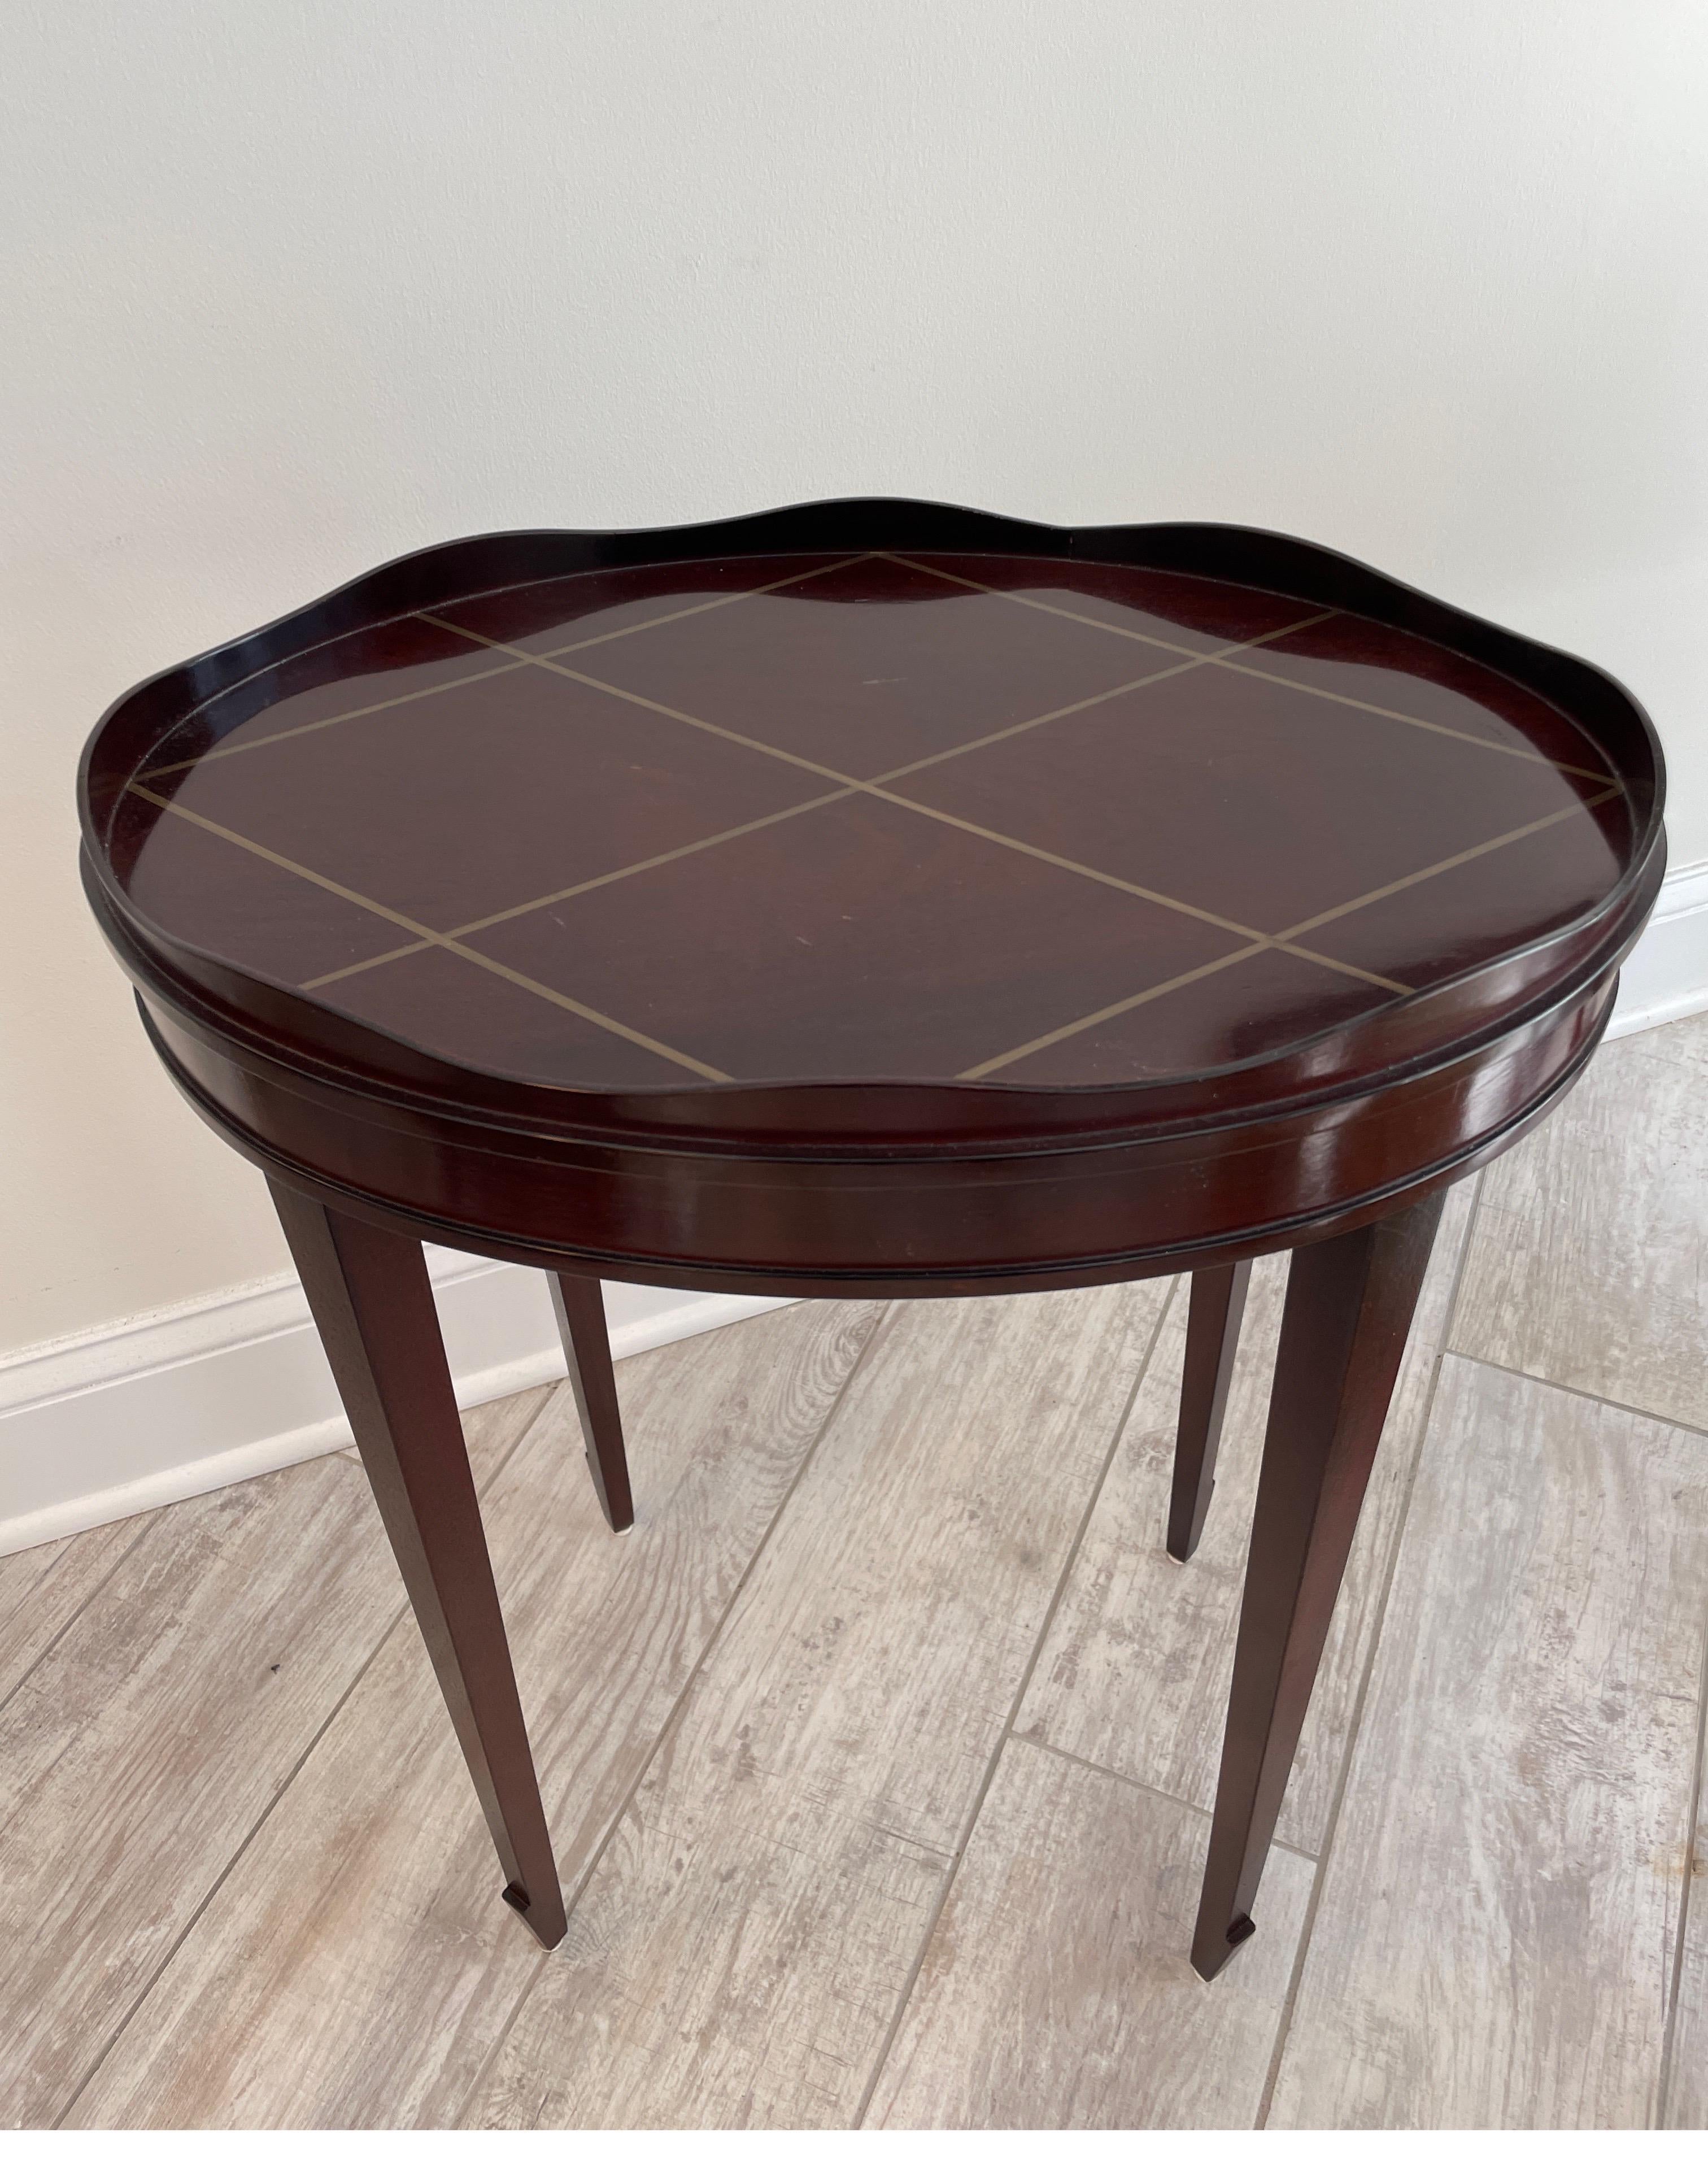 Diminutive oval gallery edge side table by Barbara Barry for Baker. Dark finish with a muted gold lattice detail on top.